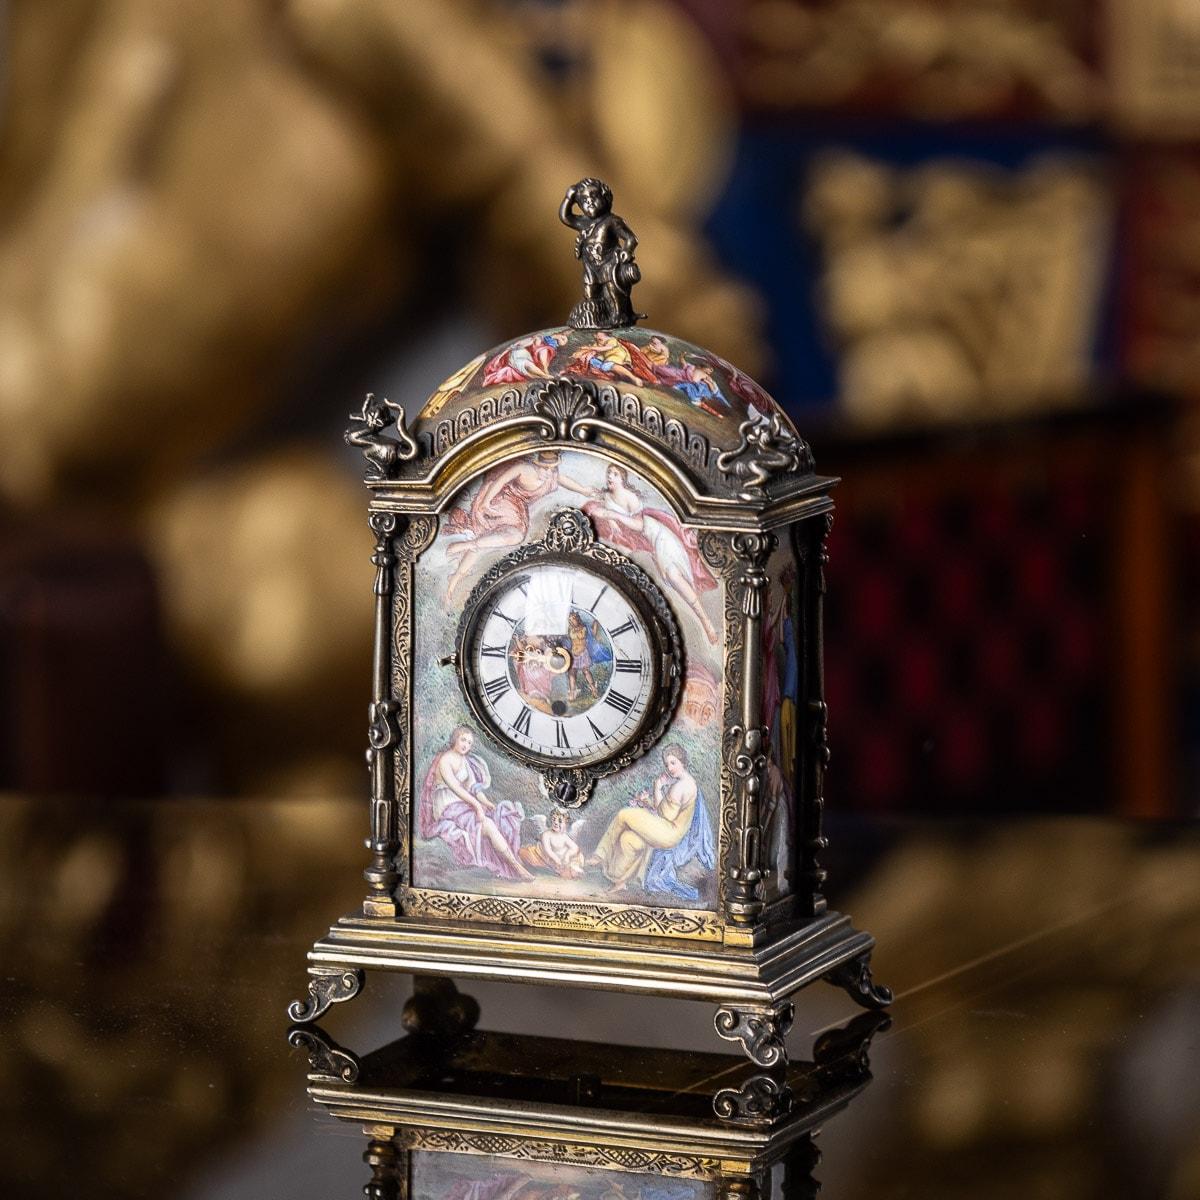 Antique late-19th century Austrian exceptional solid silver & hand painted enamel miniature clock, of traditional upright form, the corners set with columns, canopy mounted with figural finials. The front, sides and back hand painted with